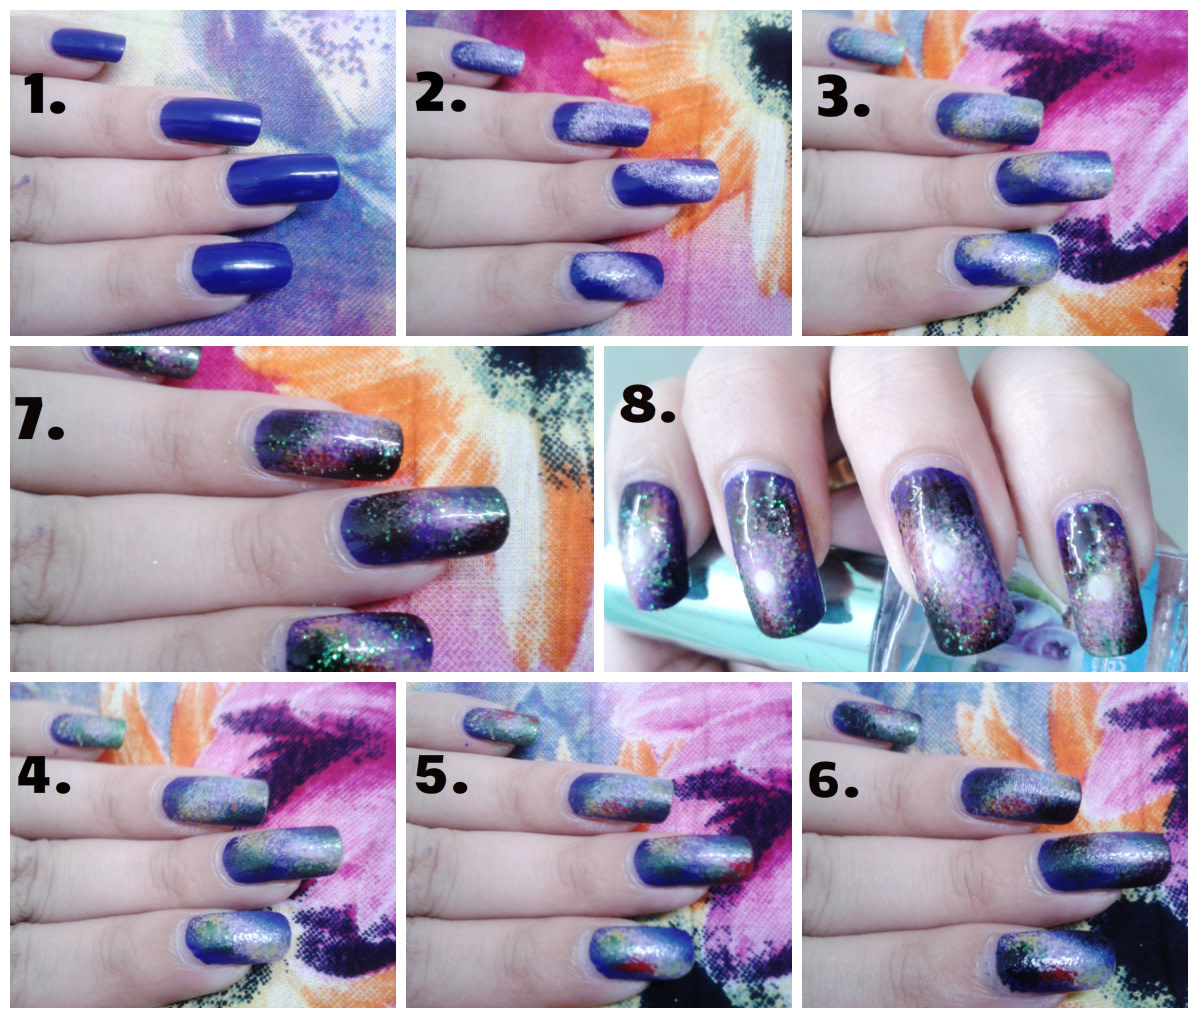 Galaxy nails painted with a sponge